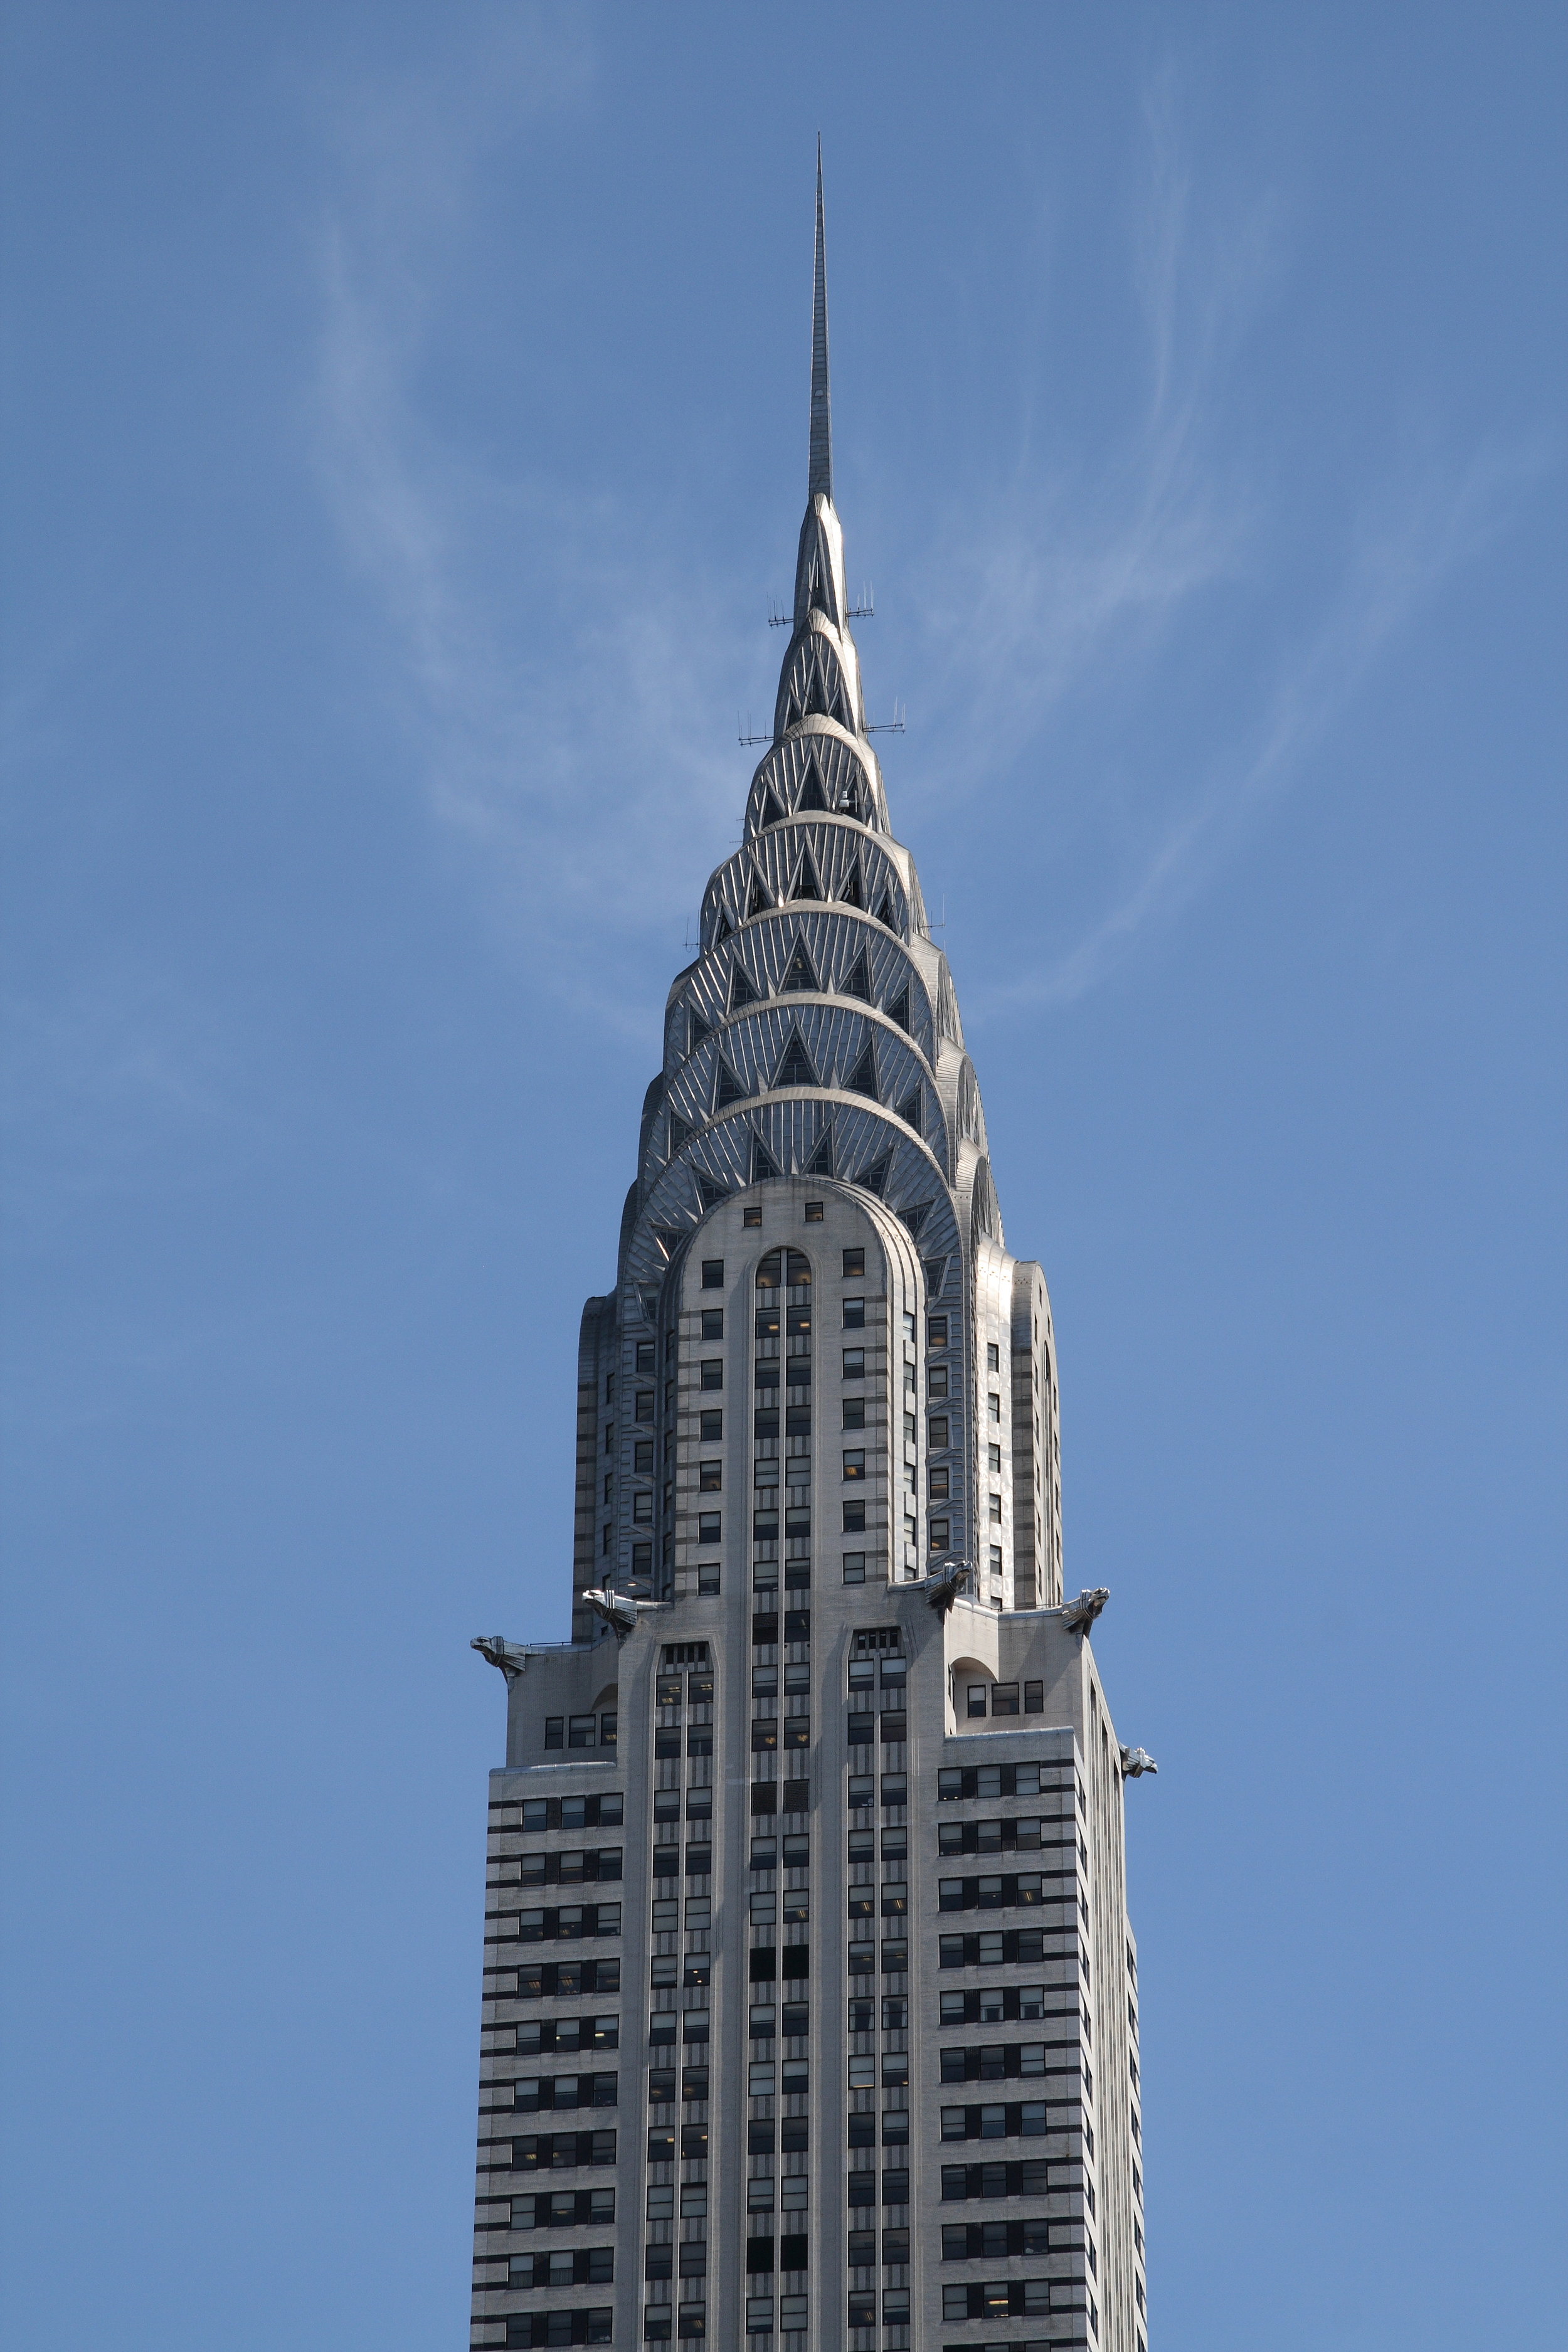 The Chrysler Building in NYC